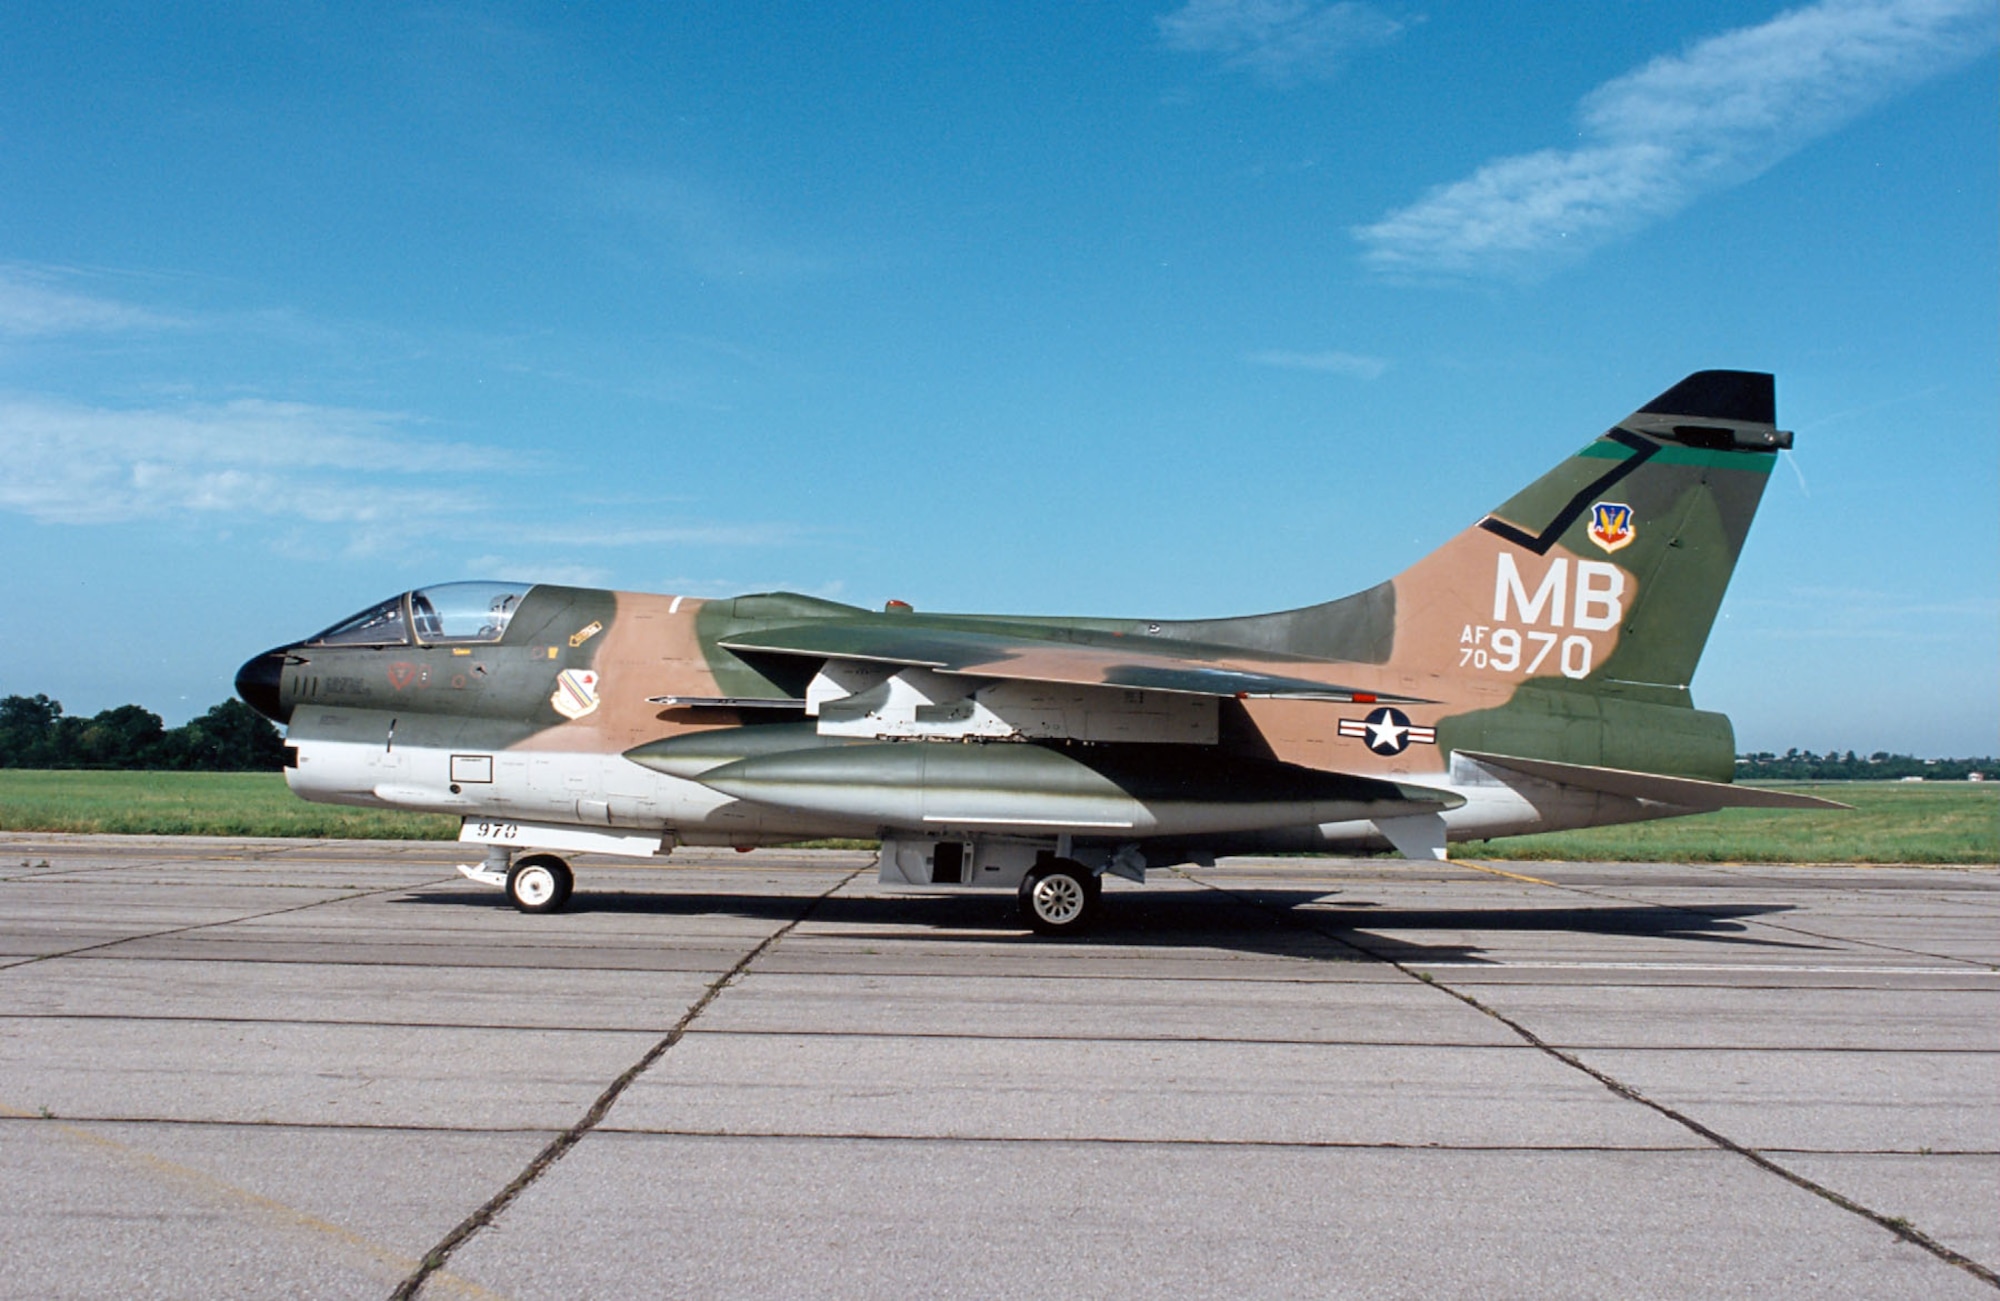 LTV A-7D Corsair II > National Museum of the States Air > Display